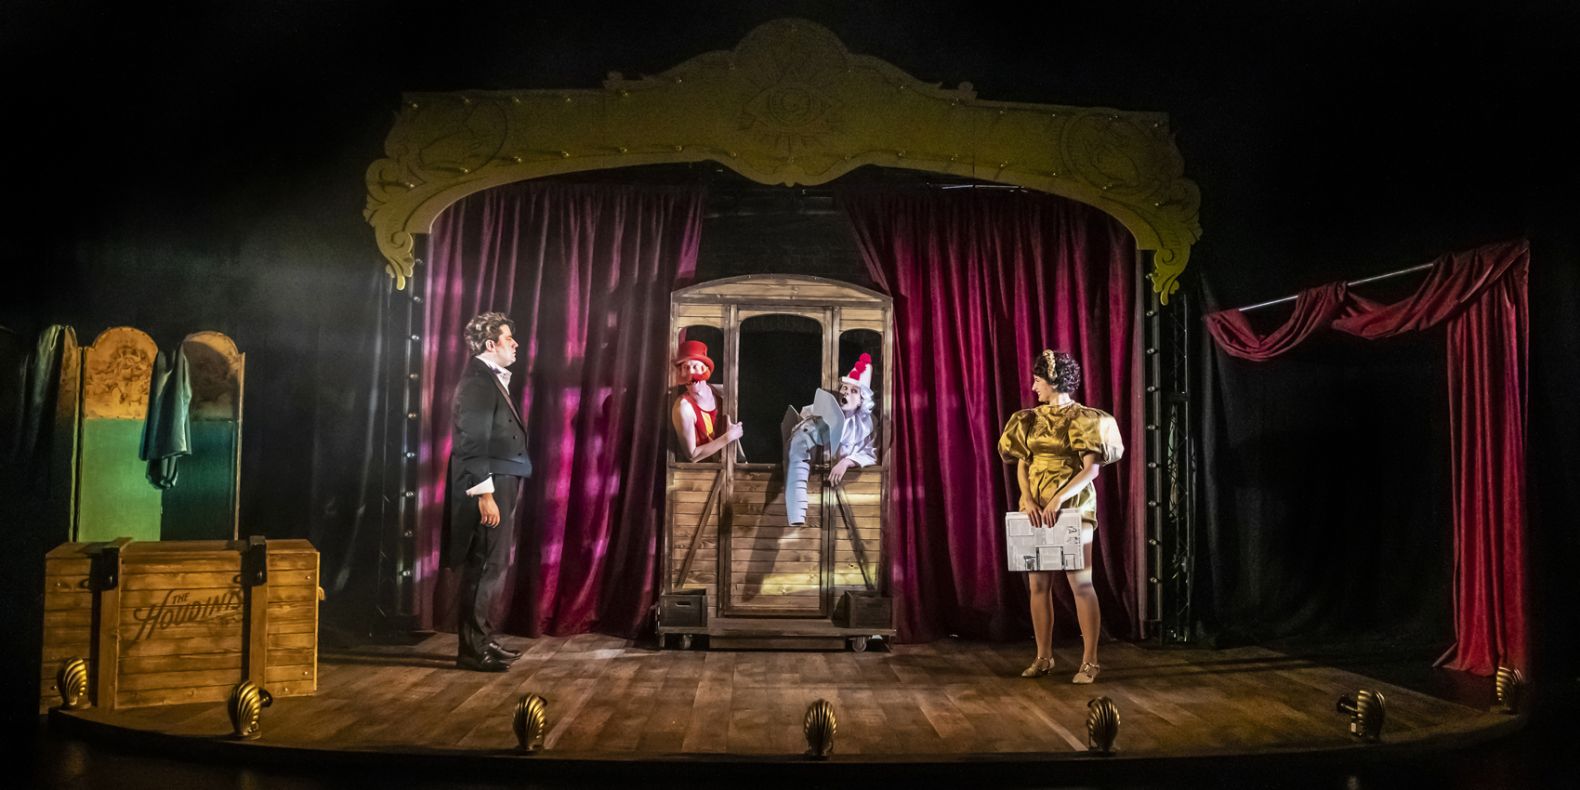 four cast members on stage with a set made up of red velvet curtains and golden footlights